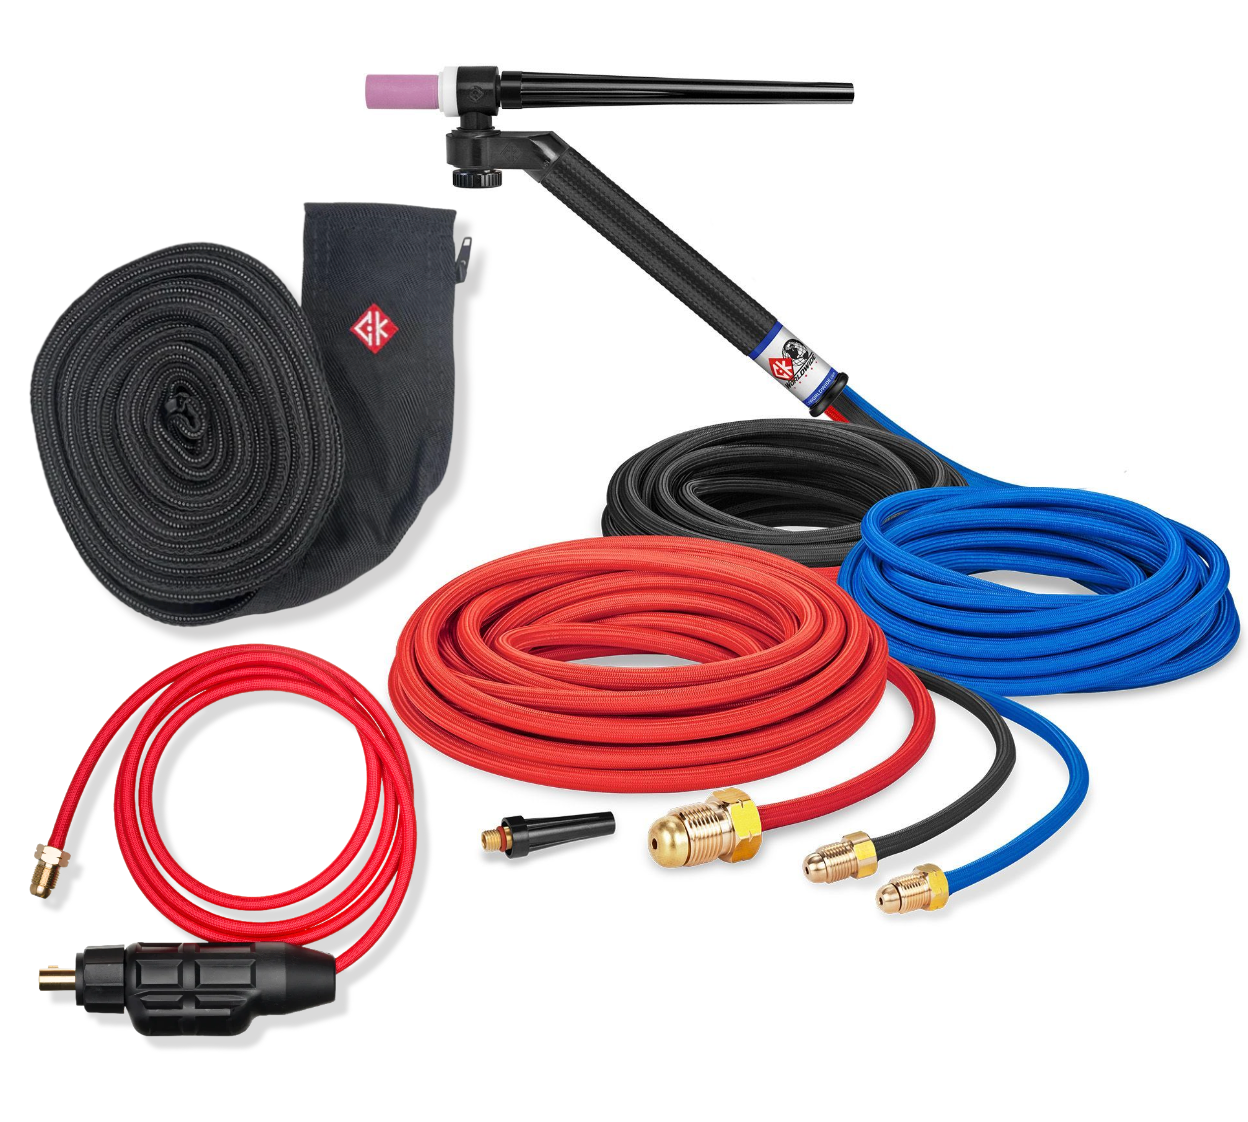 CK Worldwide FL230 Flex Loc Water Cooled Tig Torch Bundle W/ 25ft Superflex cable, SLWHAT-35 Dinse Connector, Zippered Nylon Hose Cover